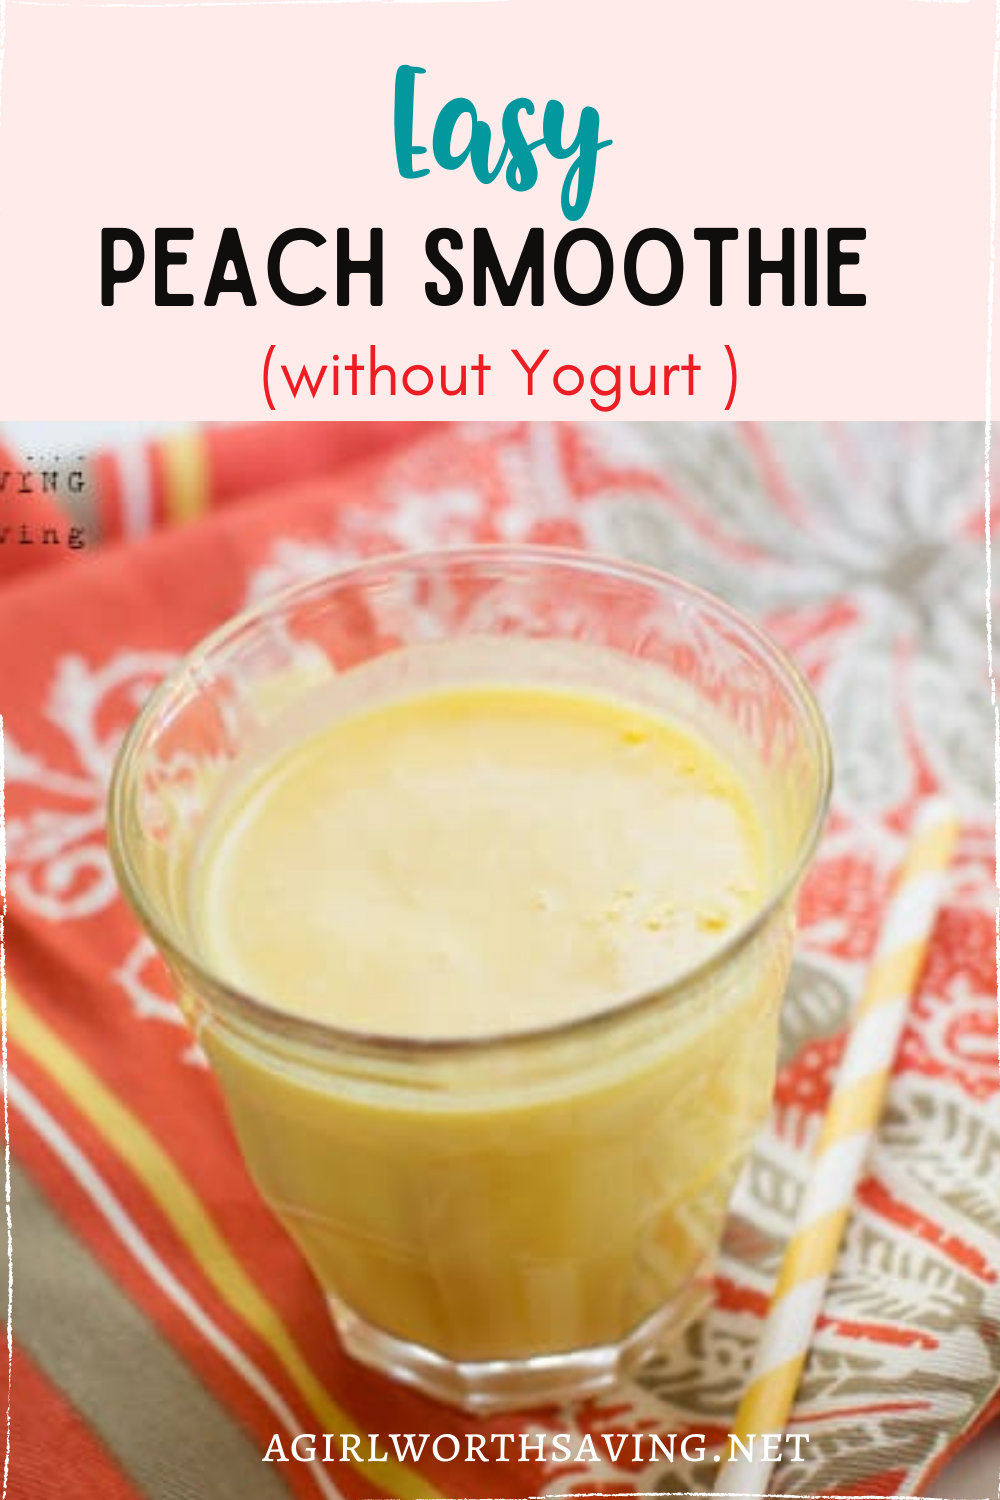 This easy peach smoothie is the perfect summer breakfast. You can use frozen peaches or canned, to enjoy it year round